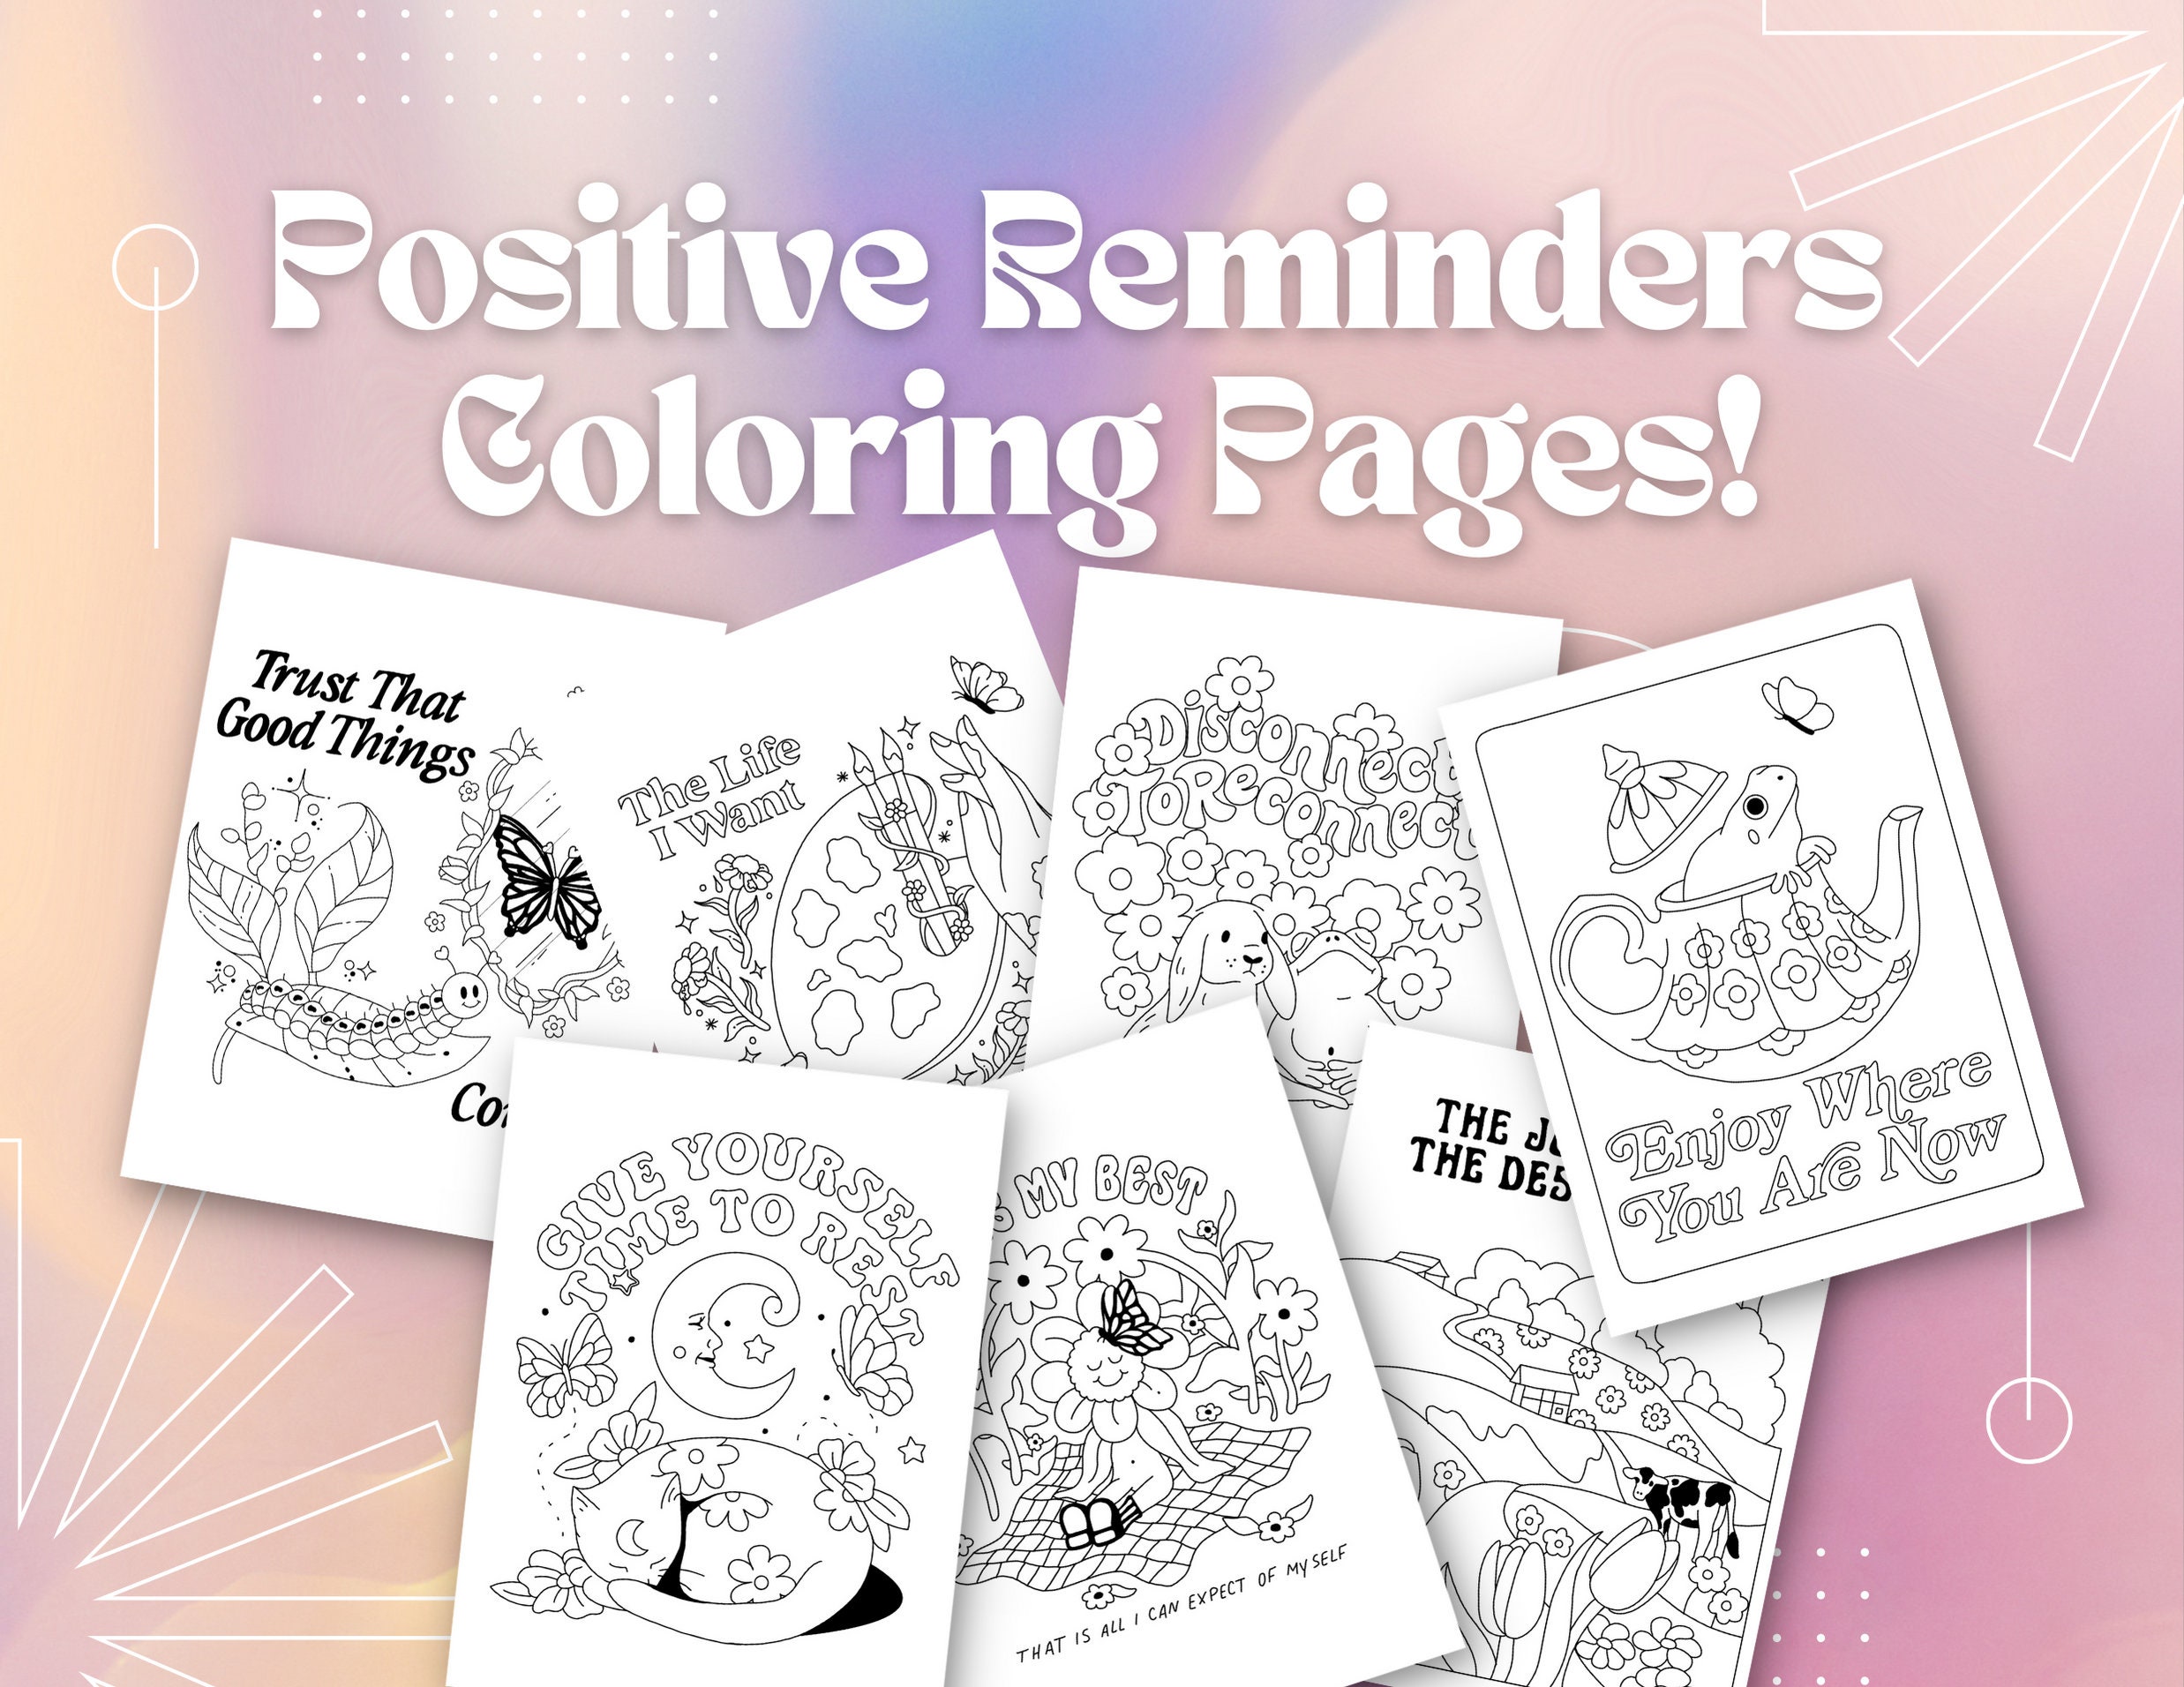 Some completed pages from my Bobbie Goods coloring book 🥰 : r